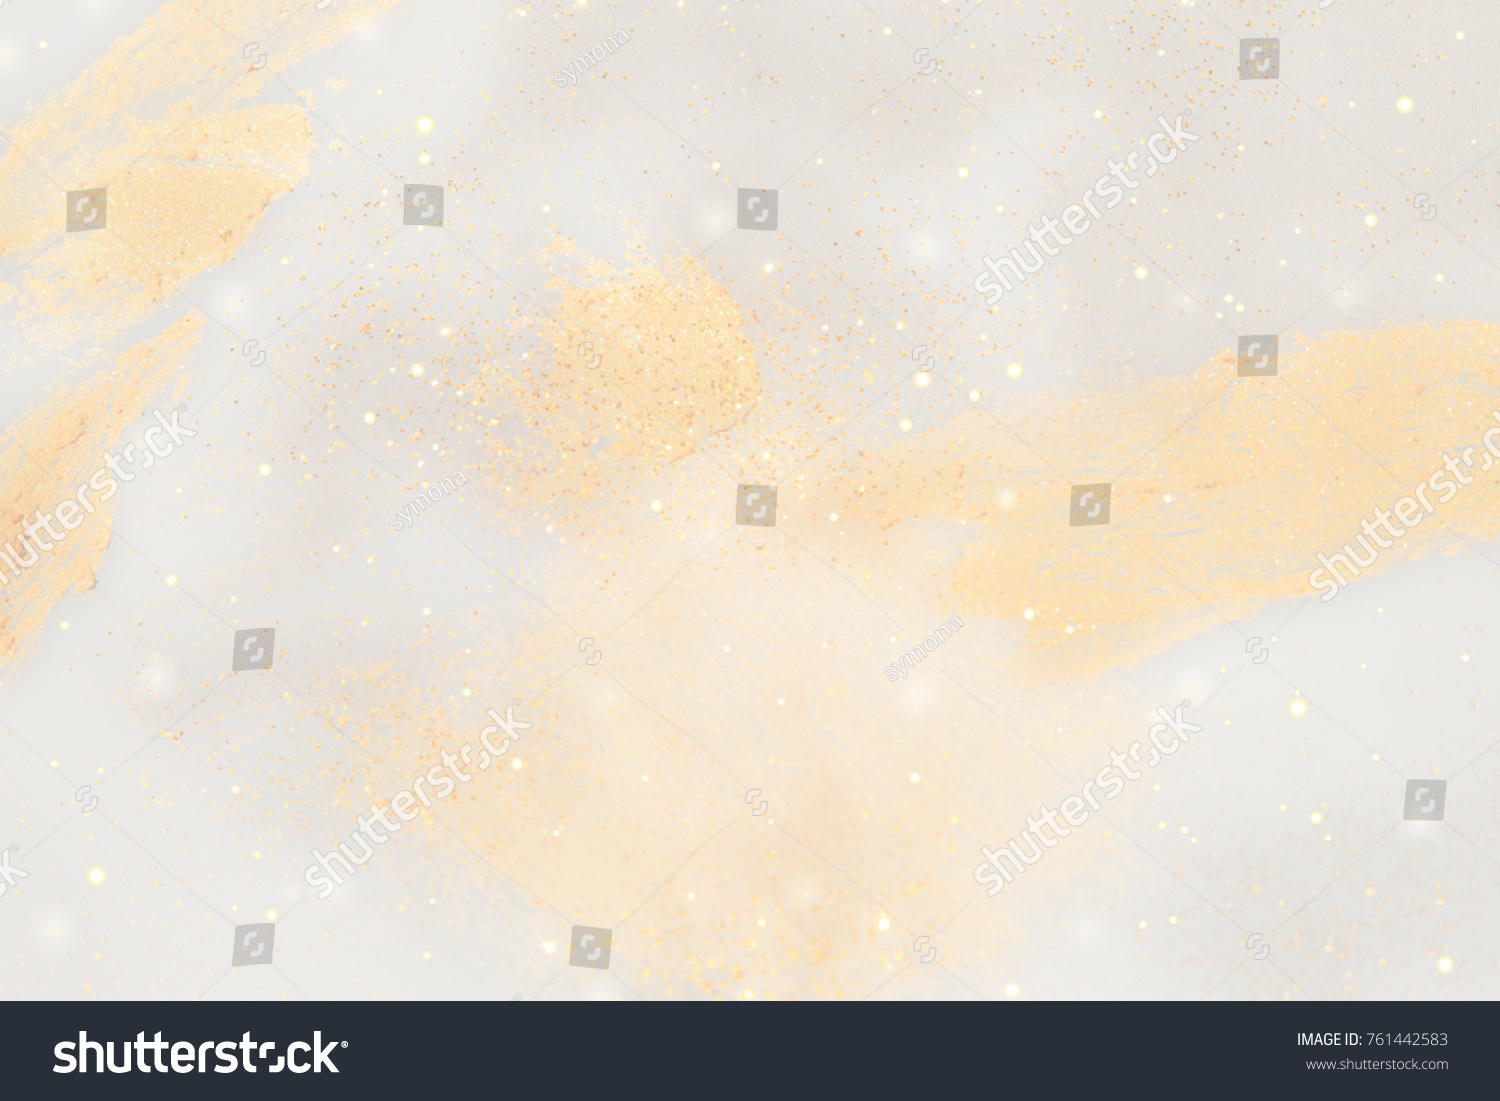 Gold White Magic Looking Background Stock Photo 761442583 | Shutterstock